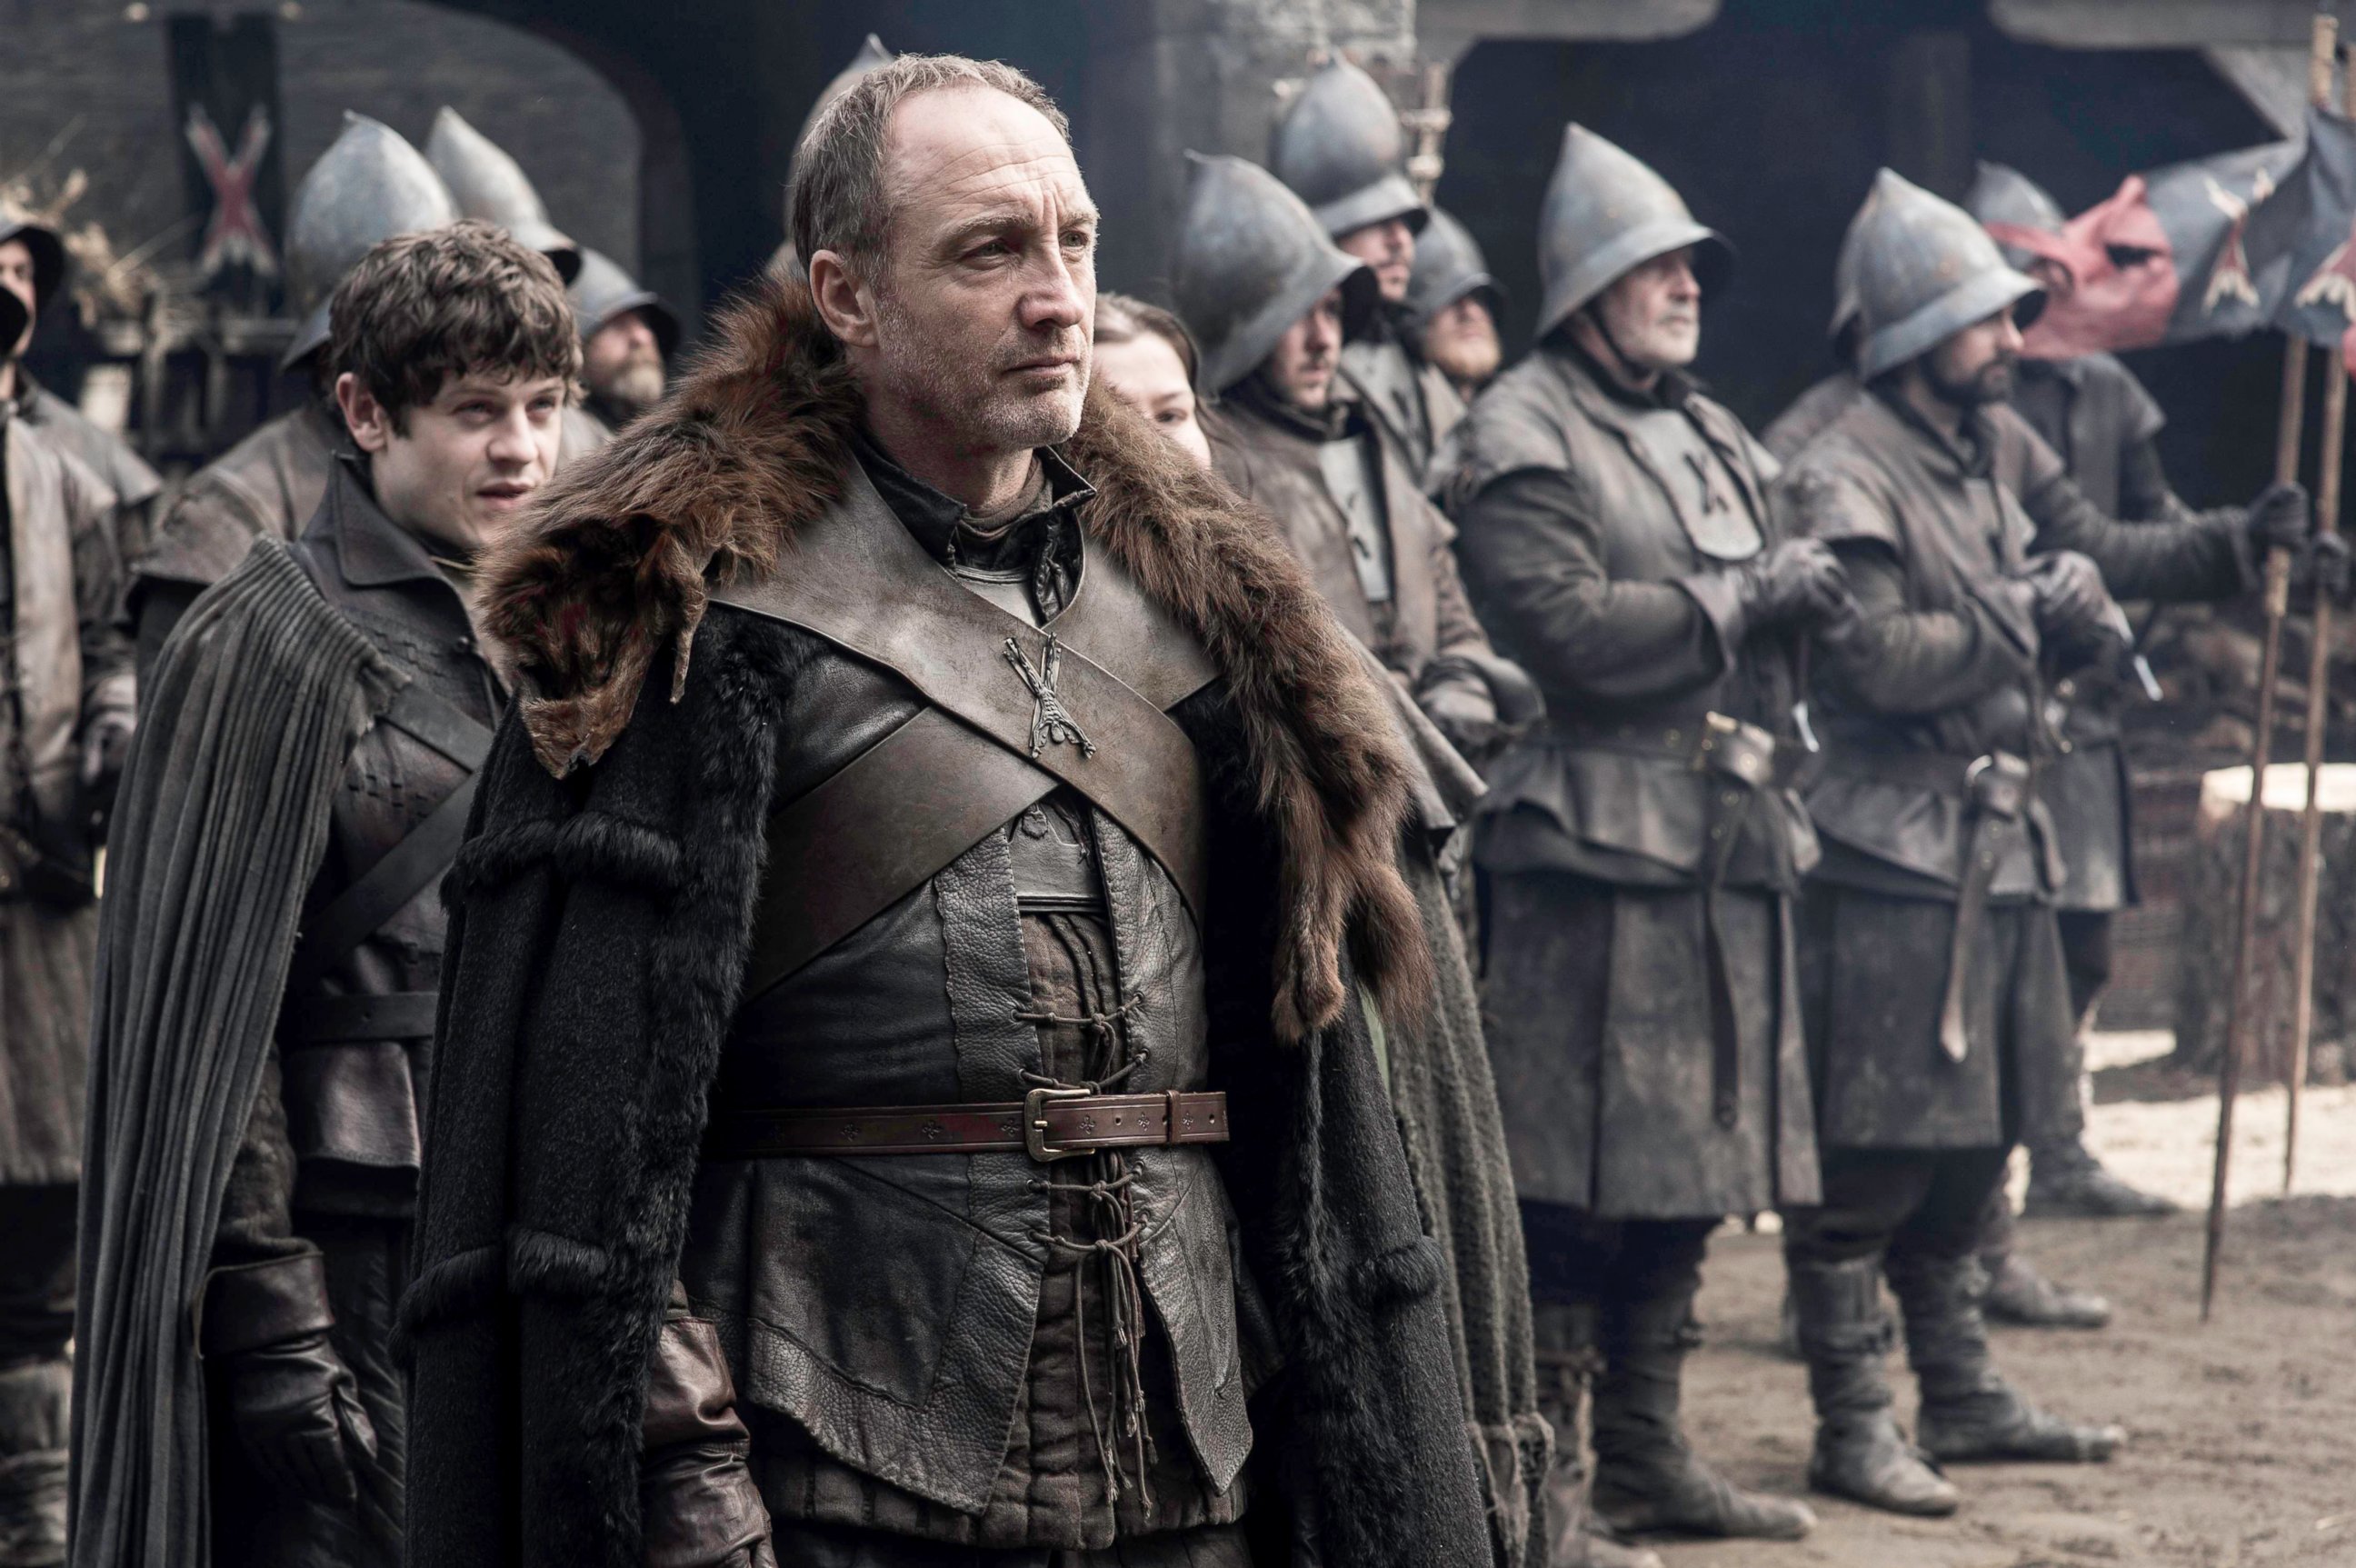 PHOTO: Michael McElhatton, as Roose Bolton, in a scene from season 5 of "Game of Thrones."